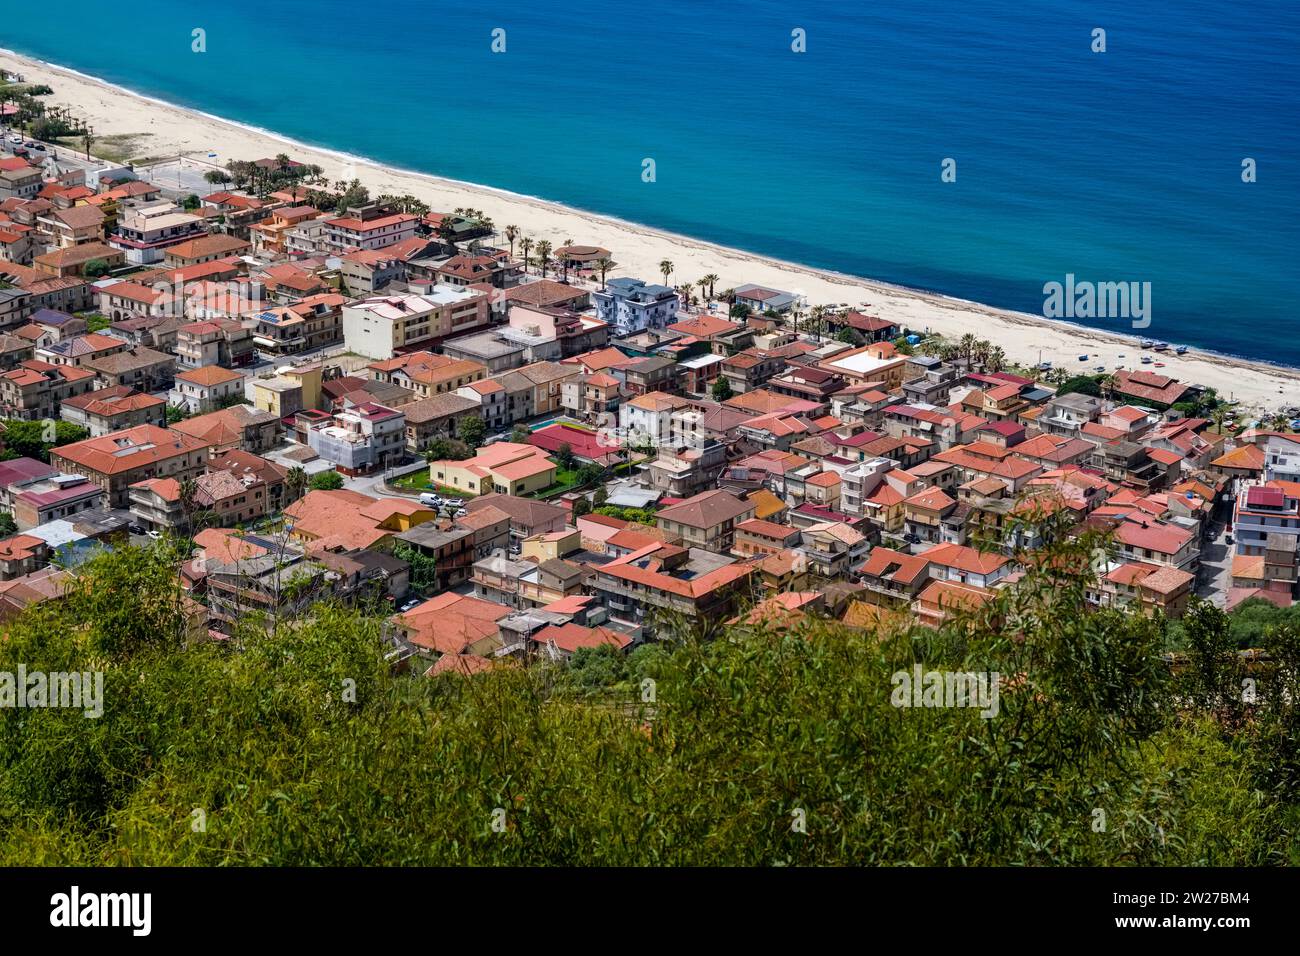 Aerial view of the roofs of the small town of Nicotera Marina, which lies on a white sandy beach. Stock Photo